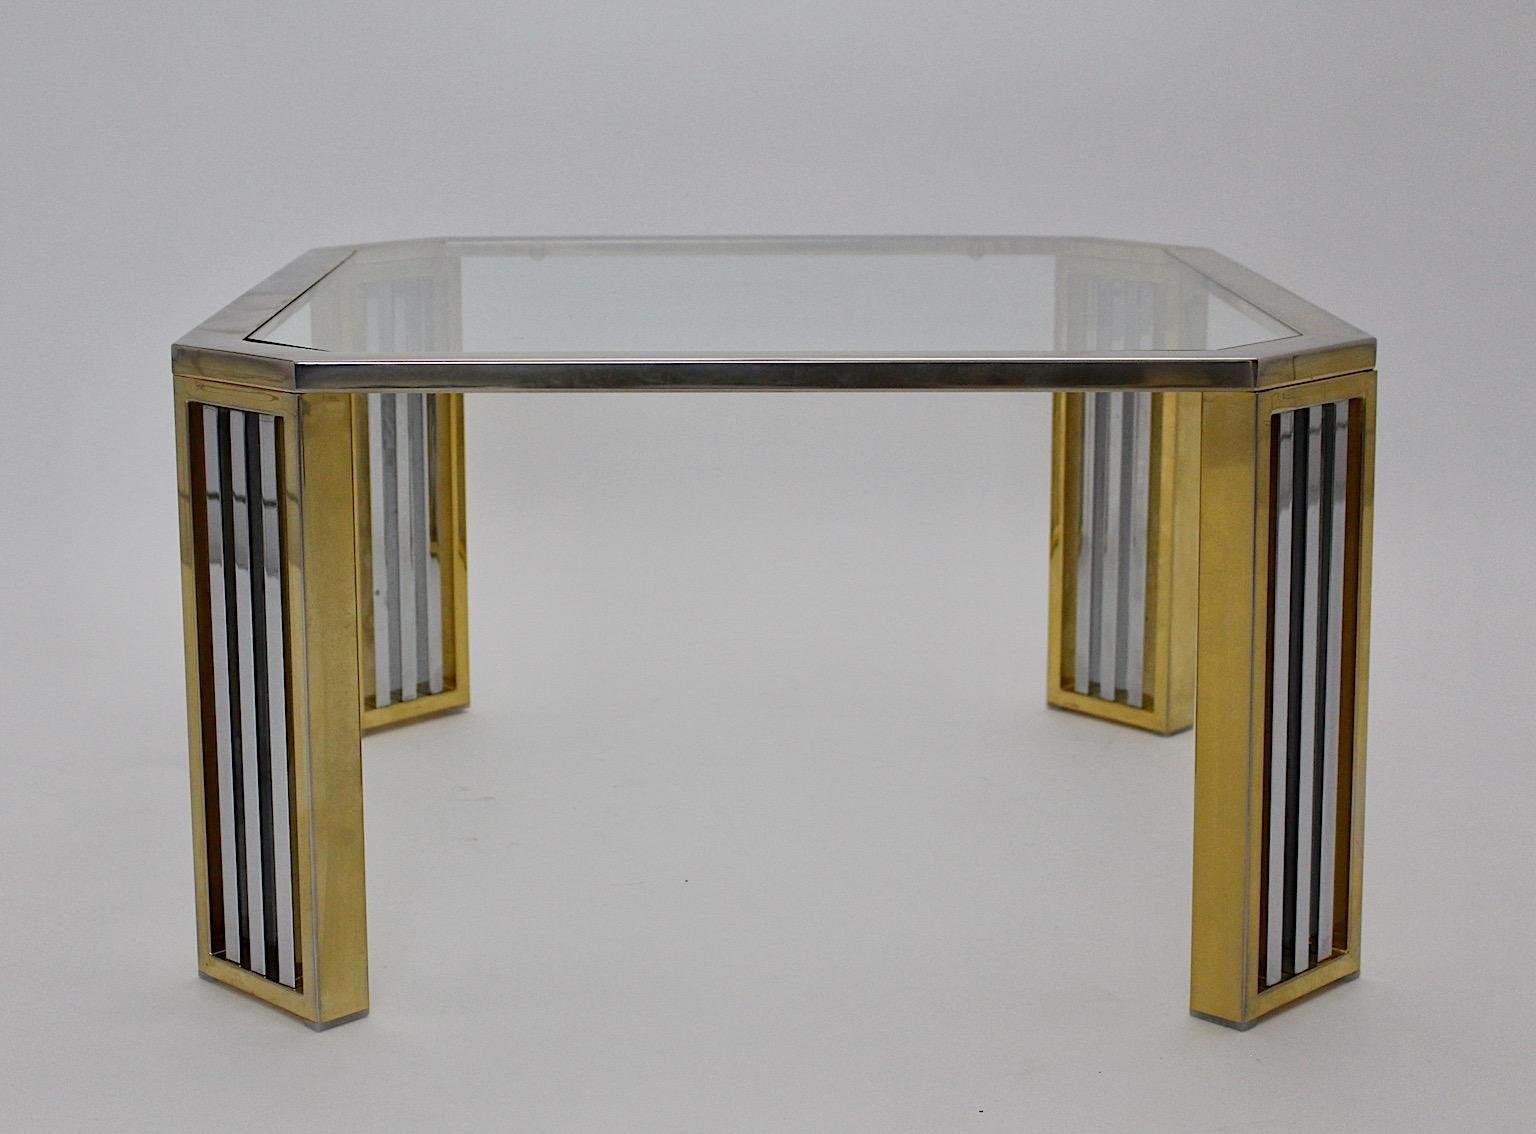 A modern vintage chromed metal and brass coffee table or sofa table, which was designed, Italy, 1970s.
Four brass feet with chromed openwork metal details make this coffee table or sofa table very good looking.
The duet of chromed metal and brass